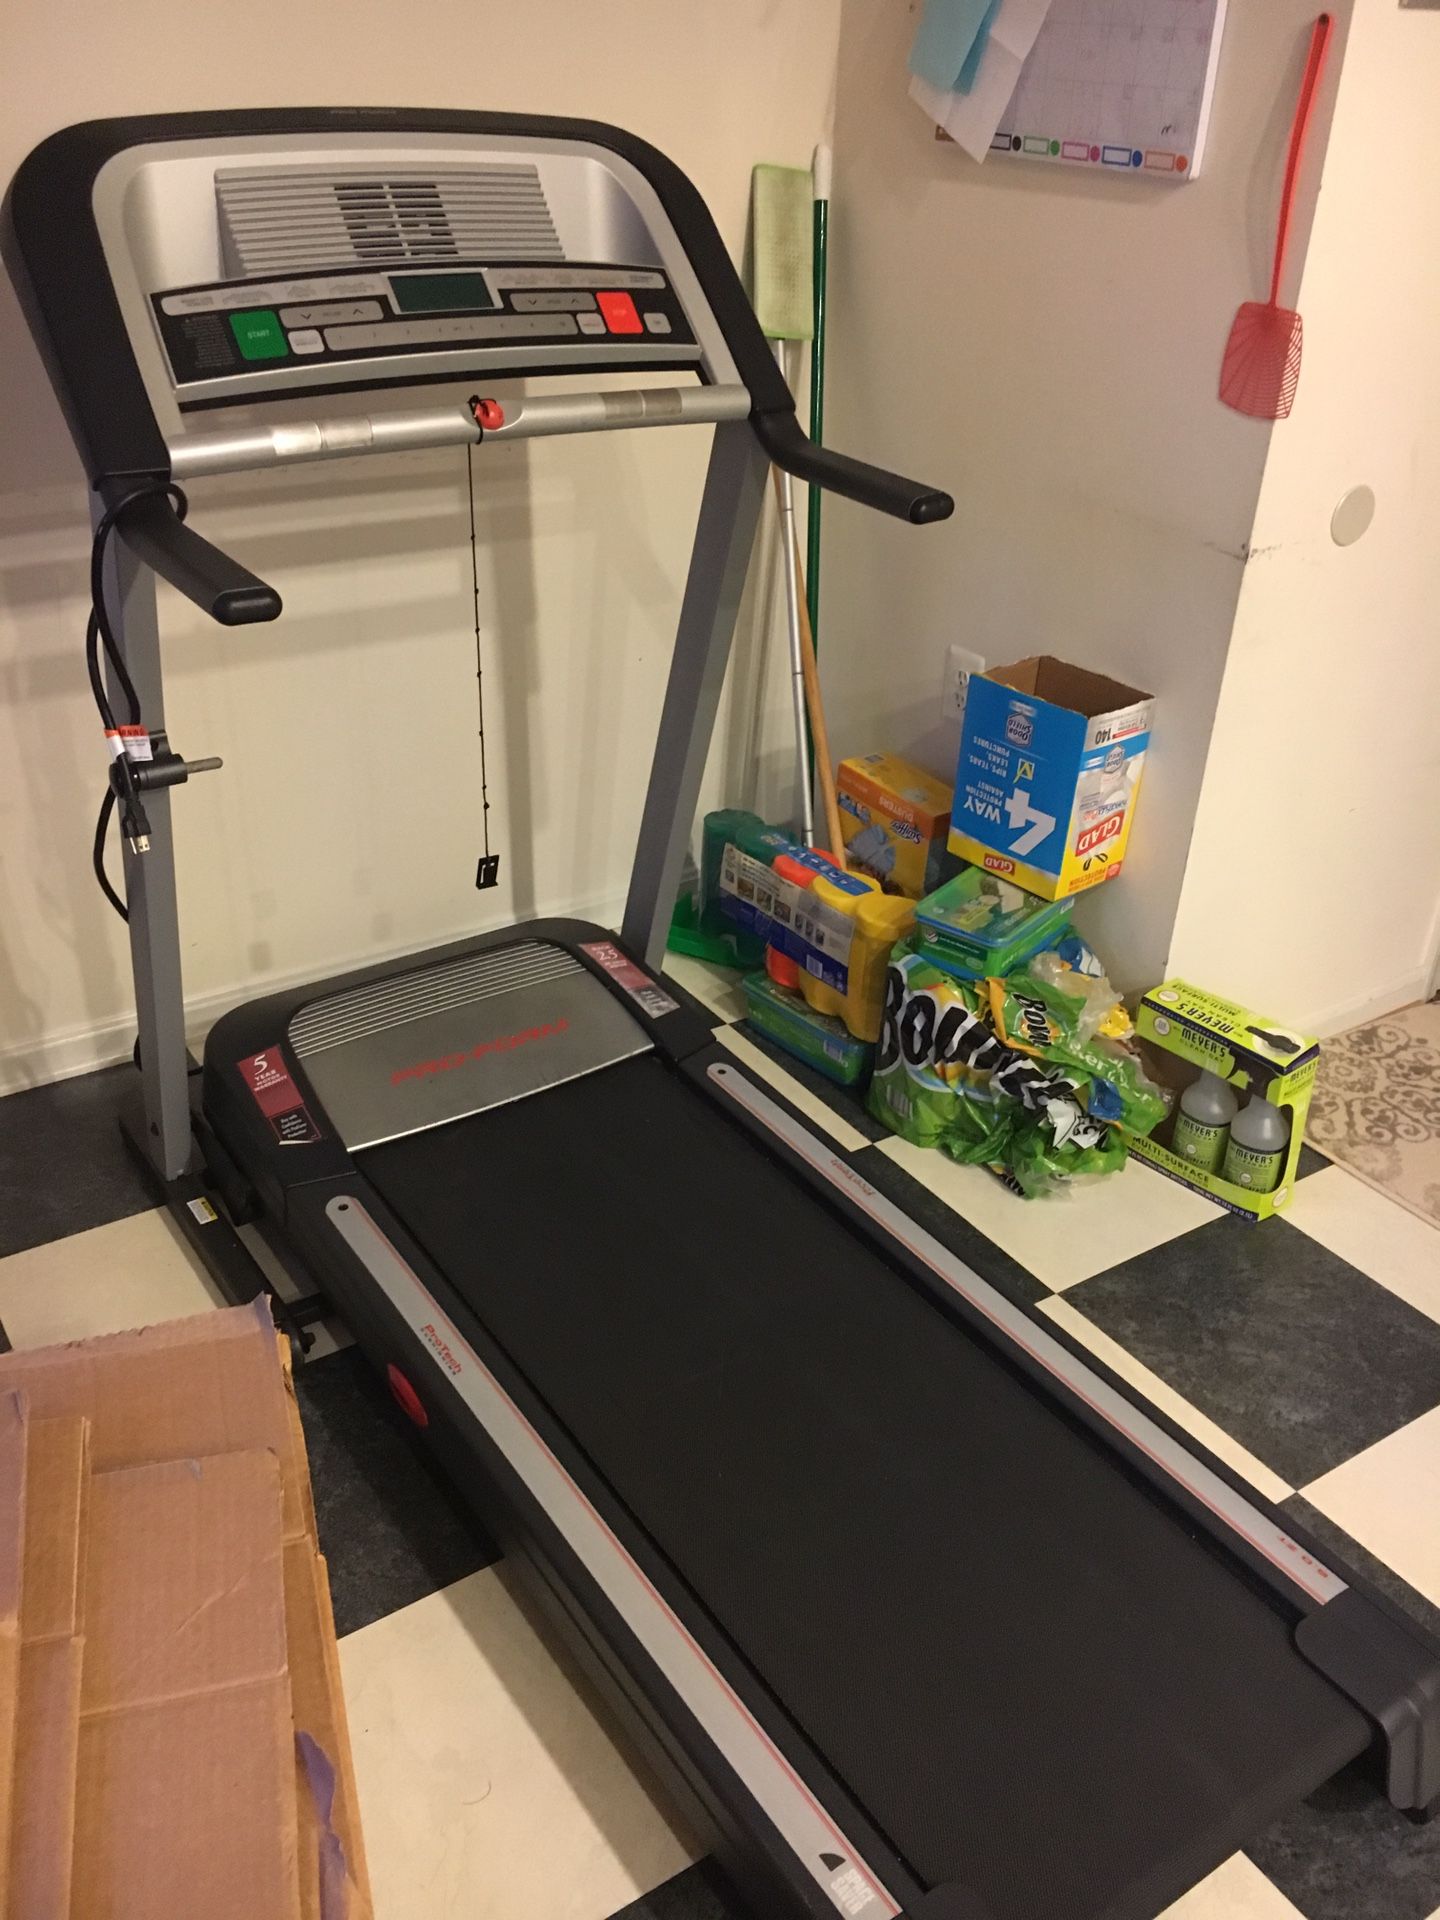 Barely used Treadmill for sale!!!